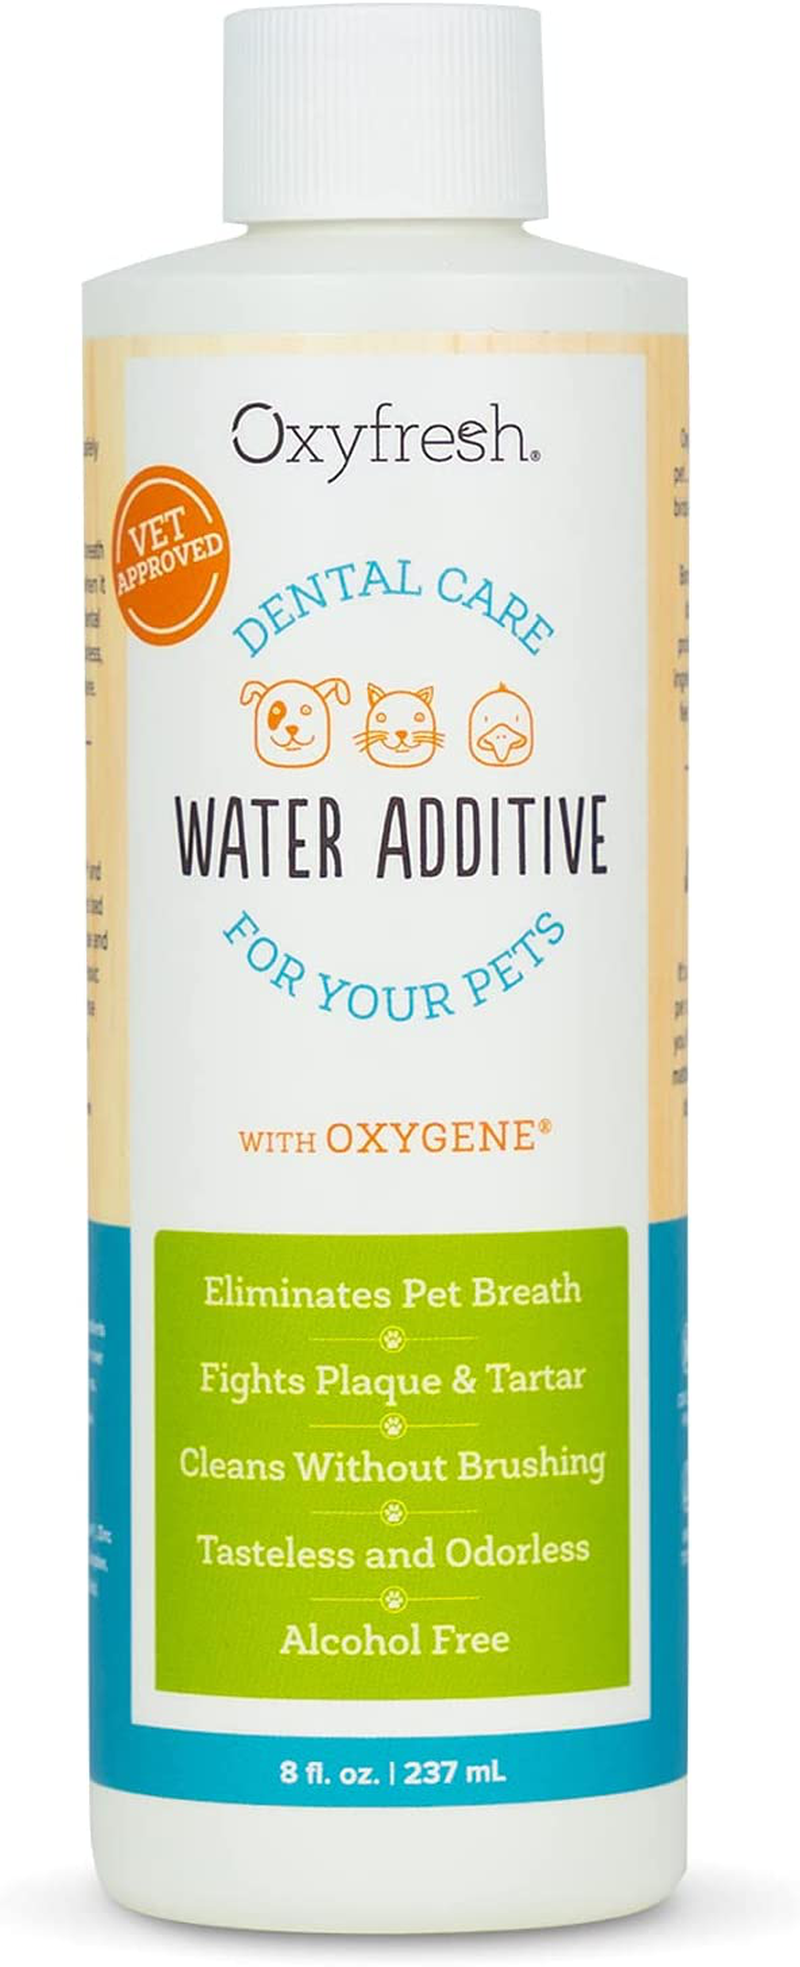 Oxyfresh Premium Pet Dental Care Solution Pet Water Additive: Best Way to Eliminate Bad Dog Breath and Cat Breath - Fights Tartar and Plaque - so Easy, Just Add to Water! Vet Recommended